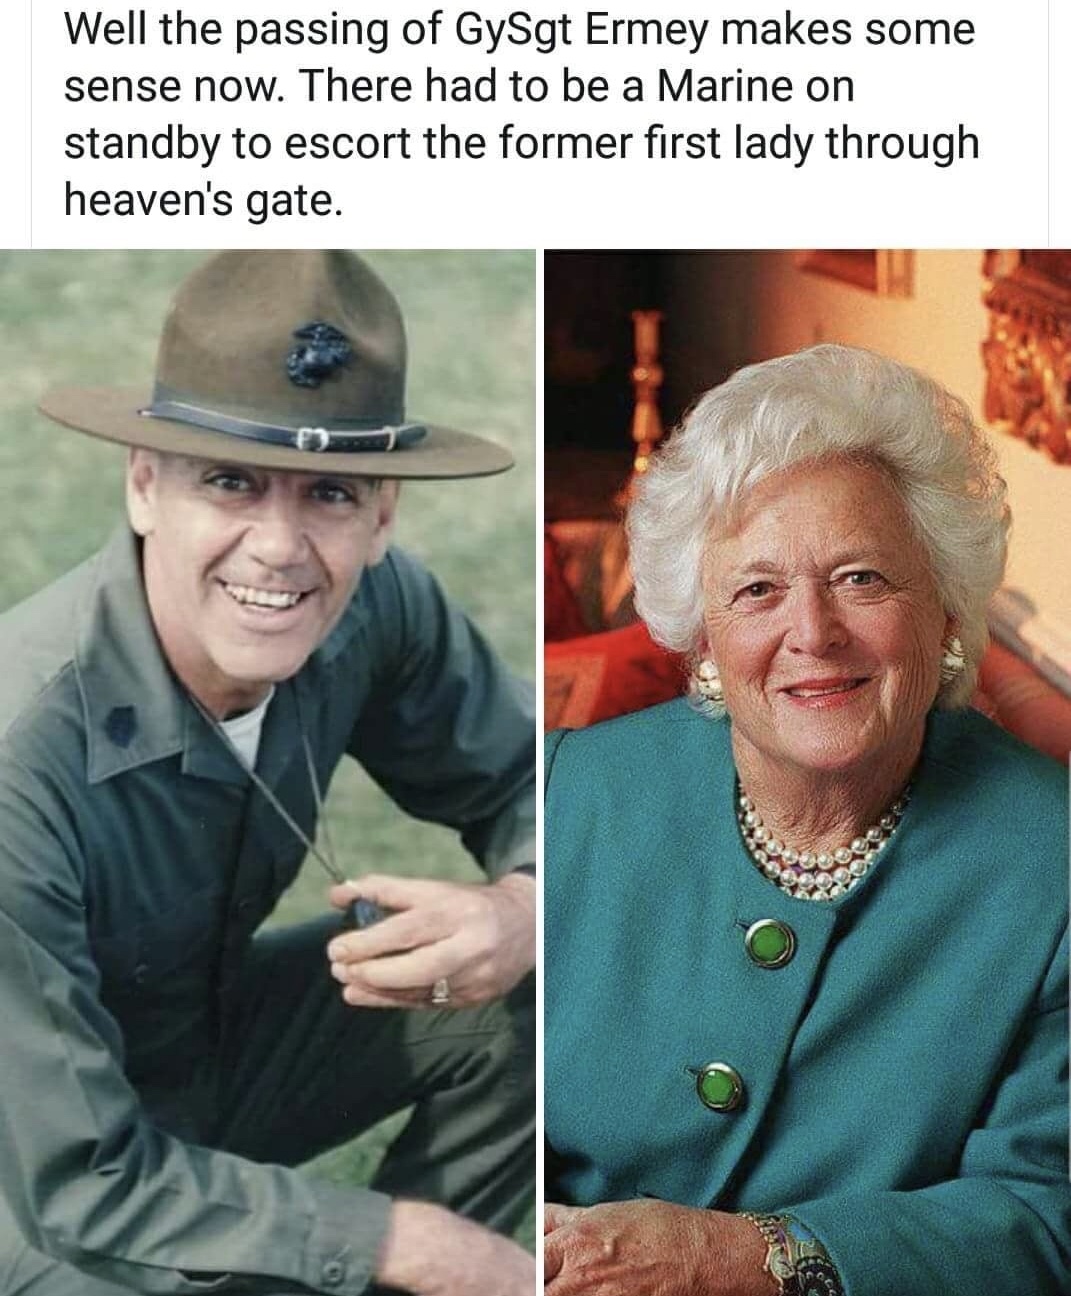 first lady barbara bush - Well the passing of GySgt Ermey makes some sense now. There had to be a Marine on standby to escort the former first lady through heaven's gate.